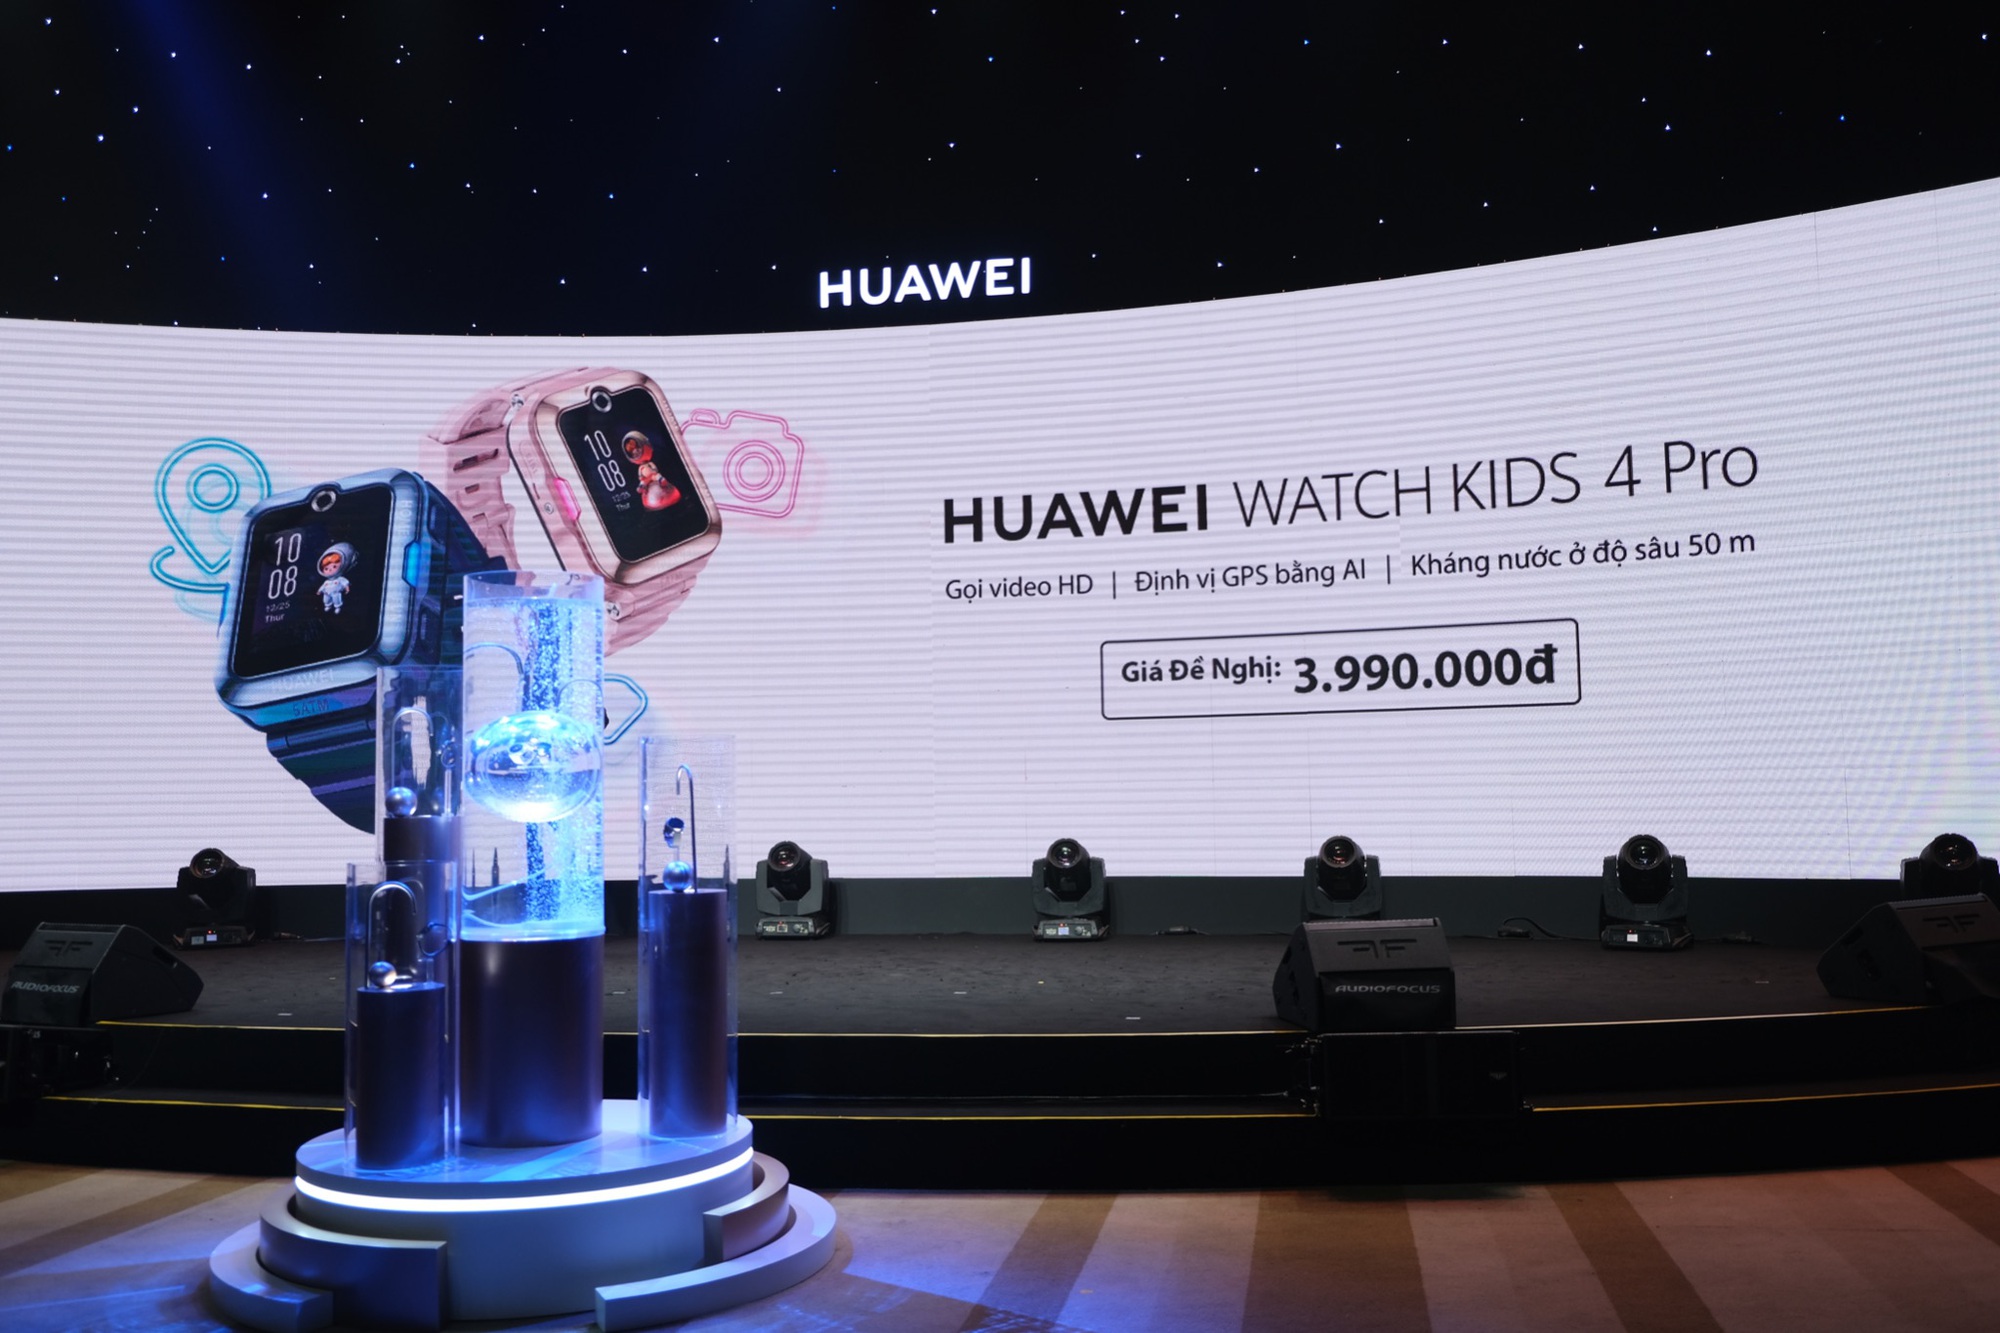 Bao Anh, Trong Hieu shined at the launch event of 3 new Huawei smartwatch models - Photo 4.